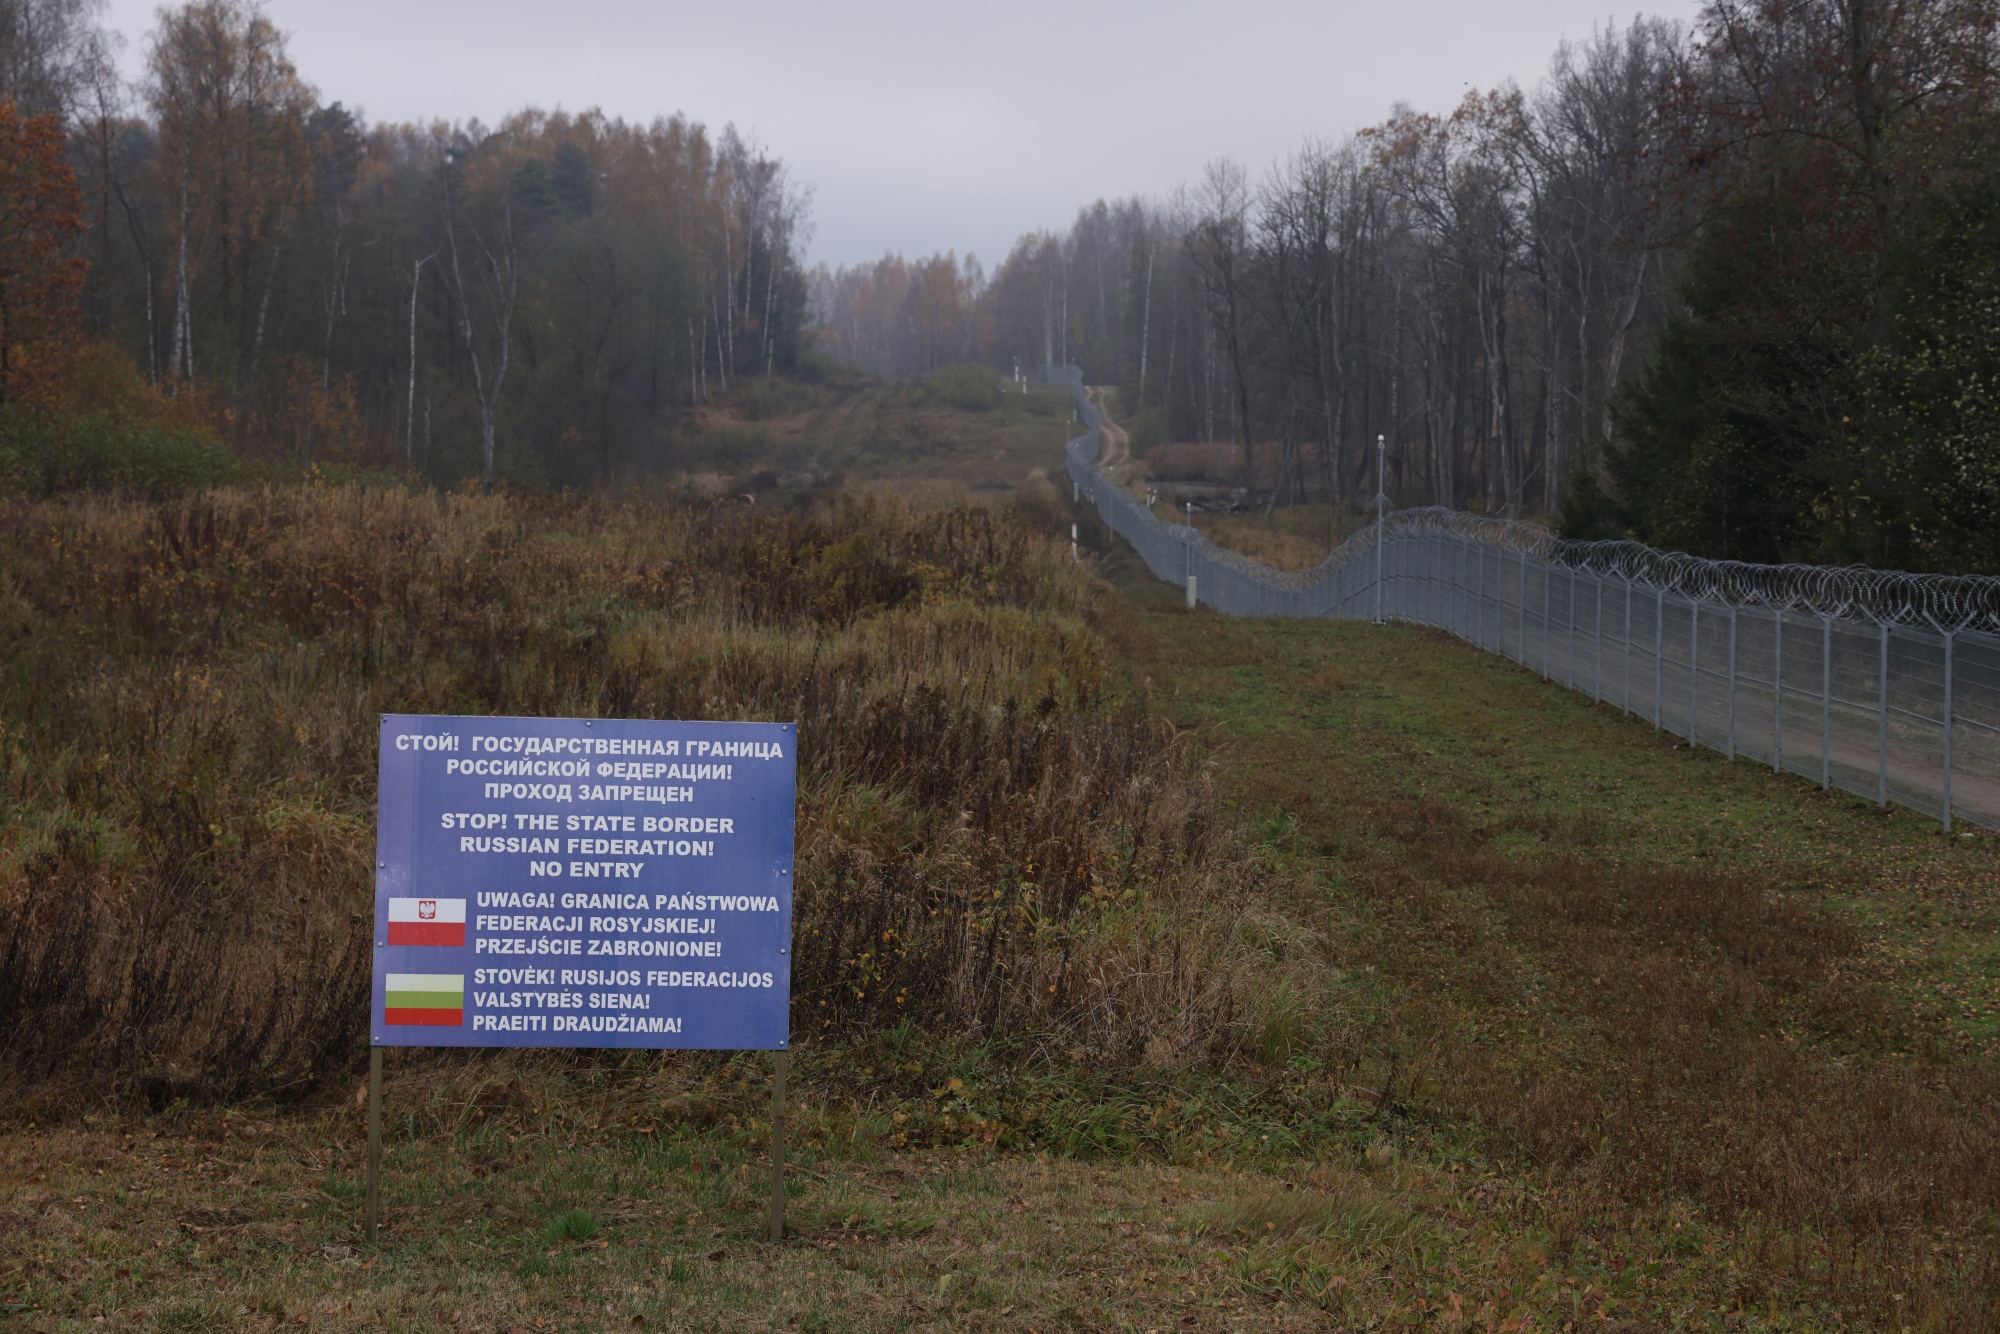 &nbsp;A warning sign on the Russian side near the point where the borders of Poland, Lithuania and Kaliningrad meet.